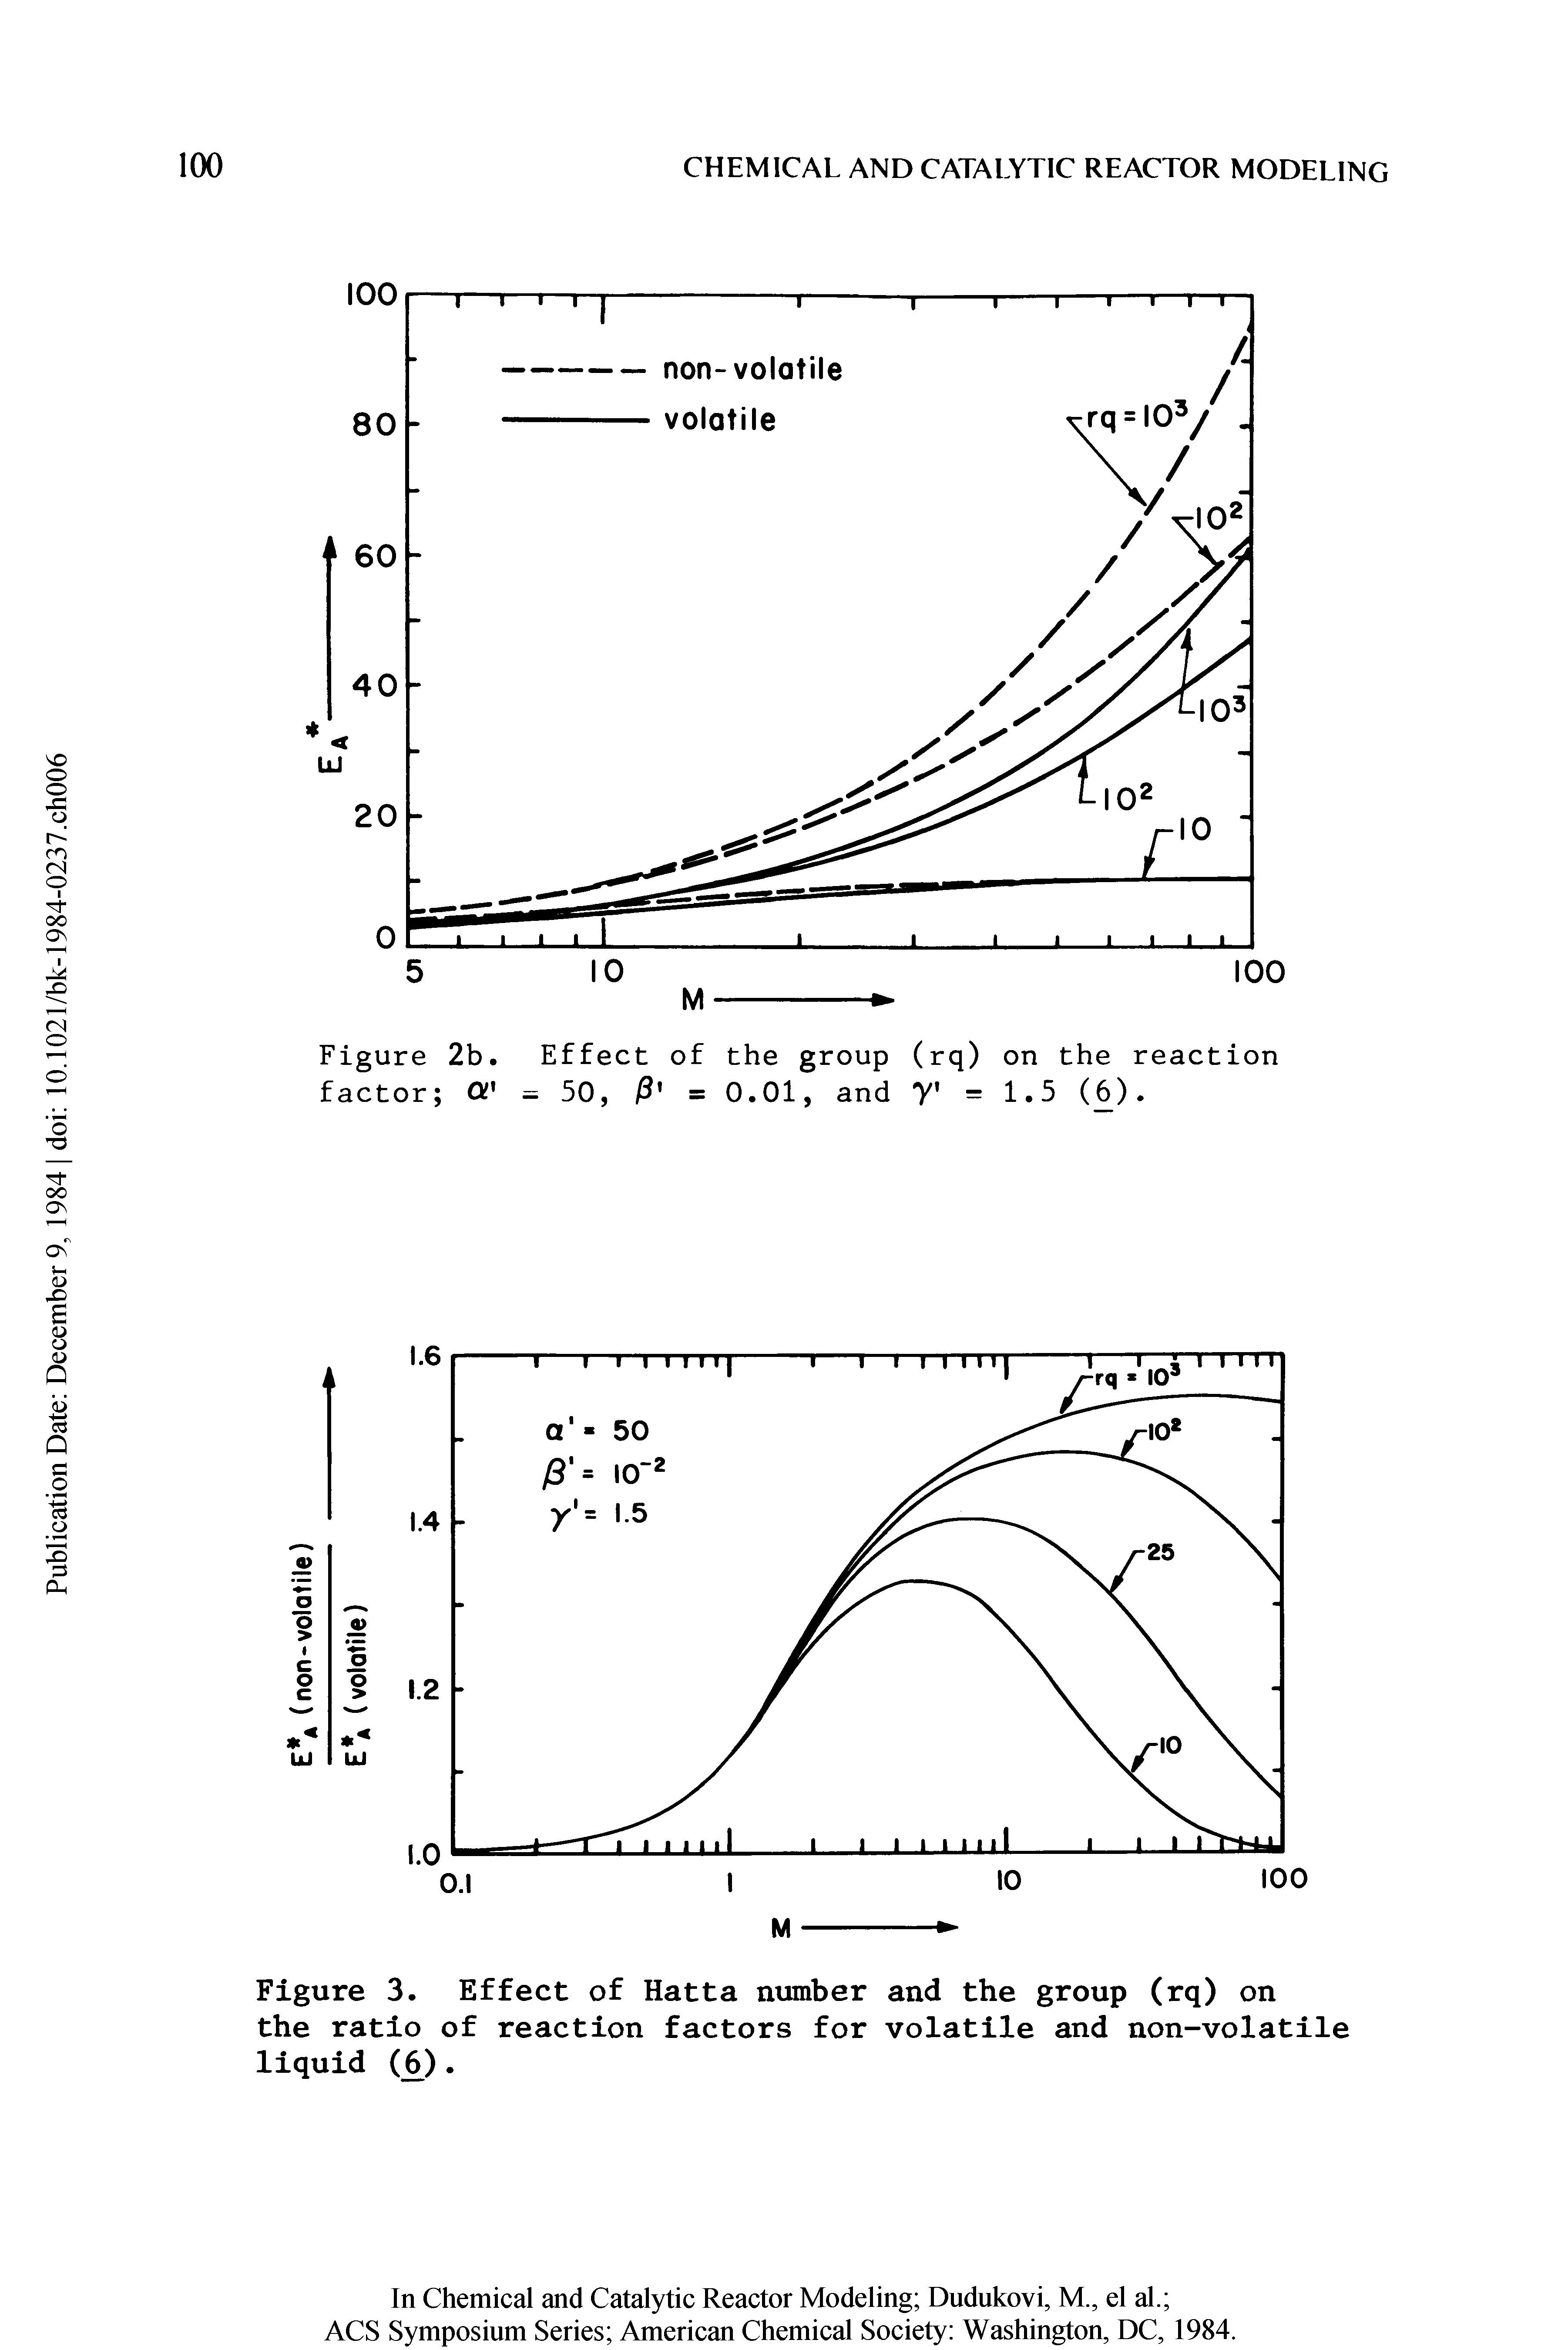 Figure 3. Effect of Hatta number and the group (rq) on the ratio of reaction factors for volatile and non-volatile liquid (6).